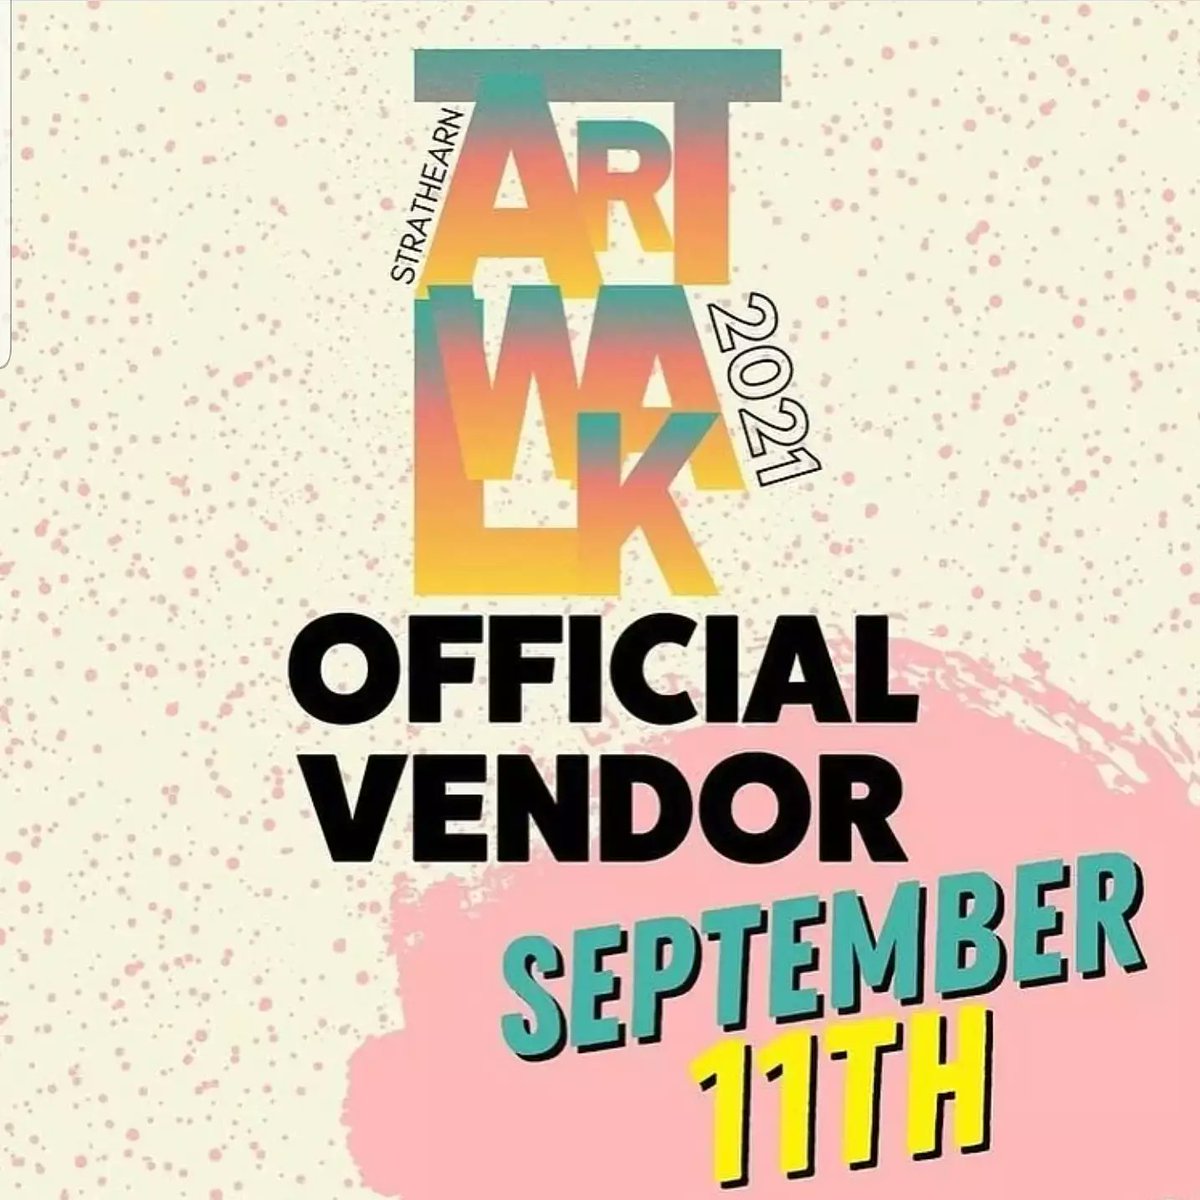 So excited to be showing at an outdoor event again. This Saturday at #Strathearnartwalk. It's been too long. Can't wait to see you there!! #art #artists #painting #acrylicpainting #yegart #popart #KevinBigelowArt